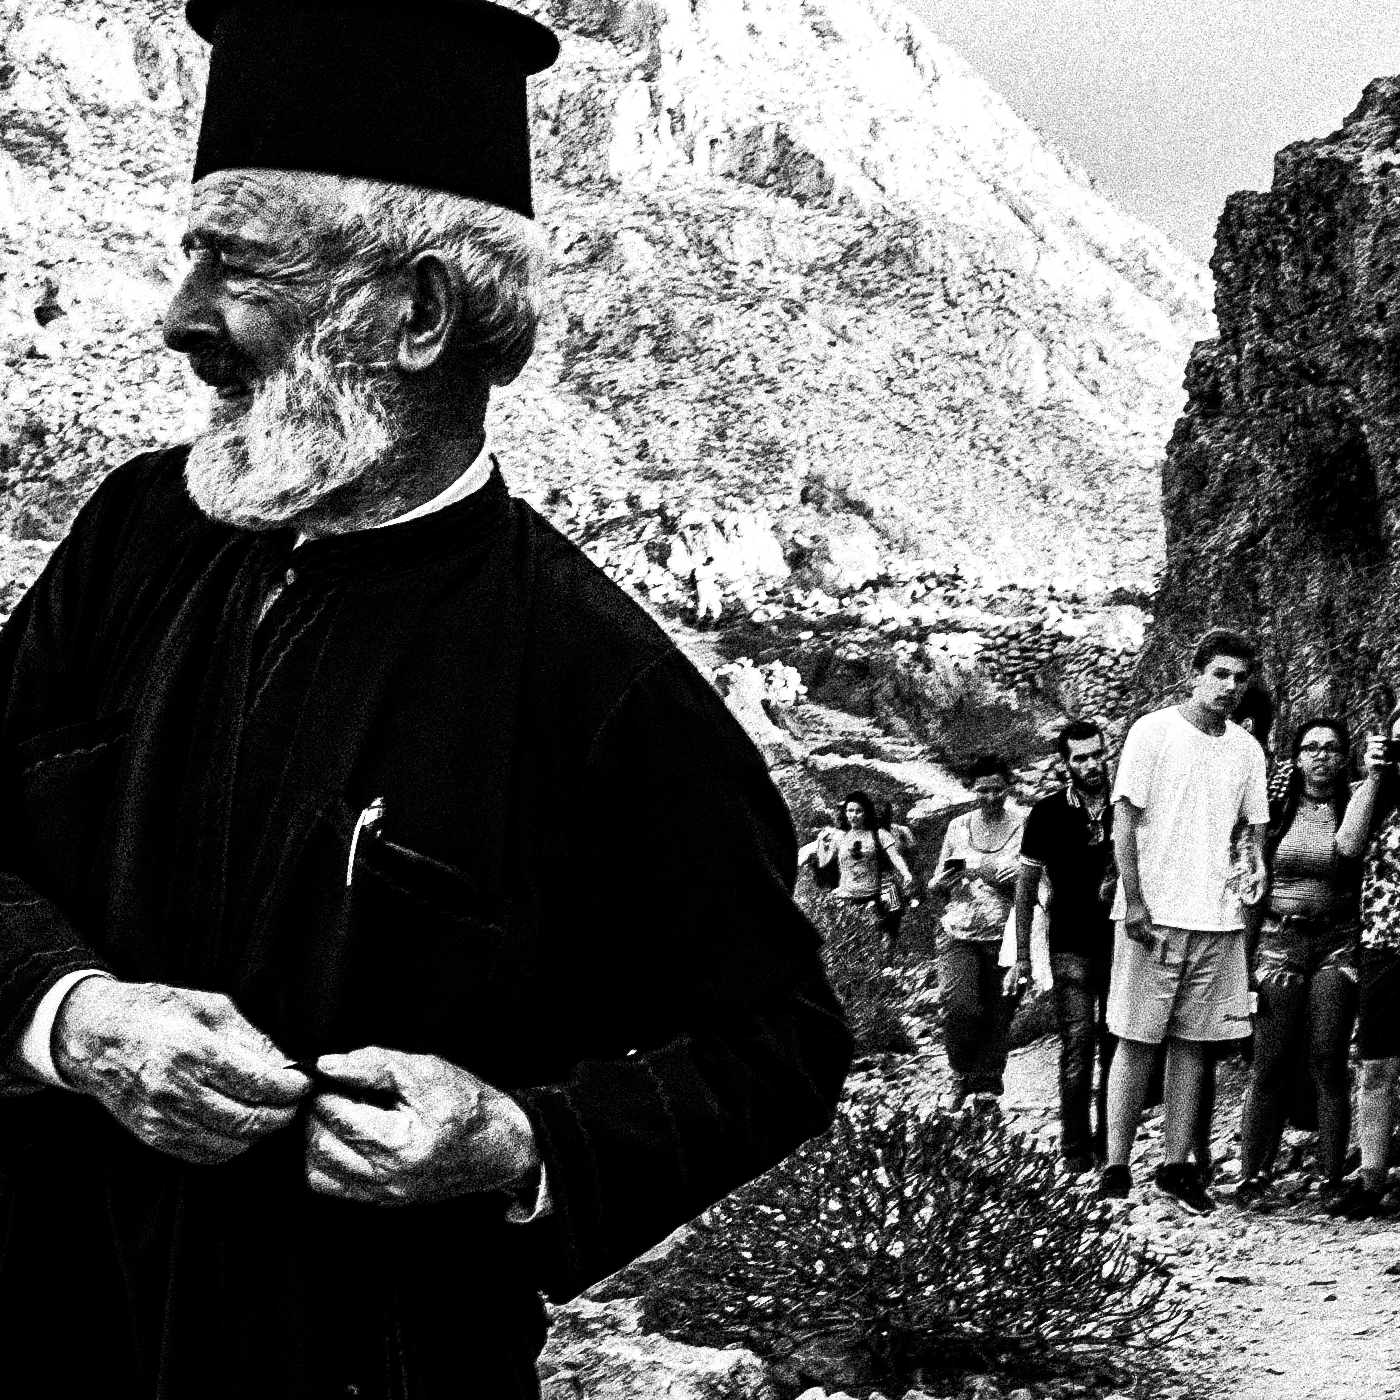 Black and White Photography Wall Art Greece | Priest at the St. John celebration in Vrykounta Olympos Karpathos Dodecanese by George Tatakis - detailed view